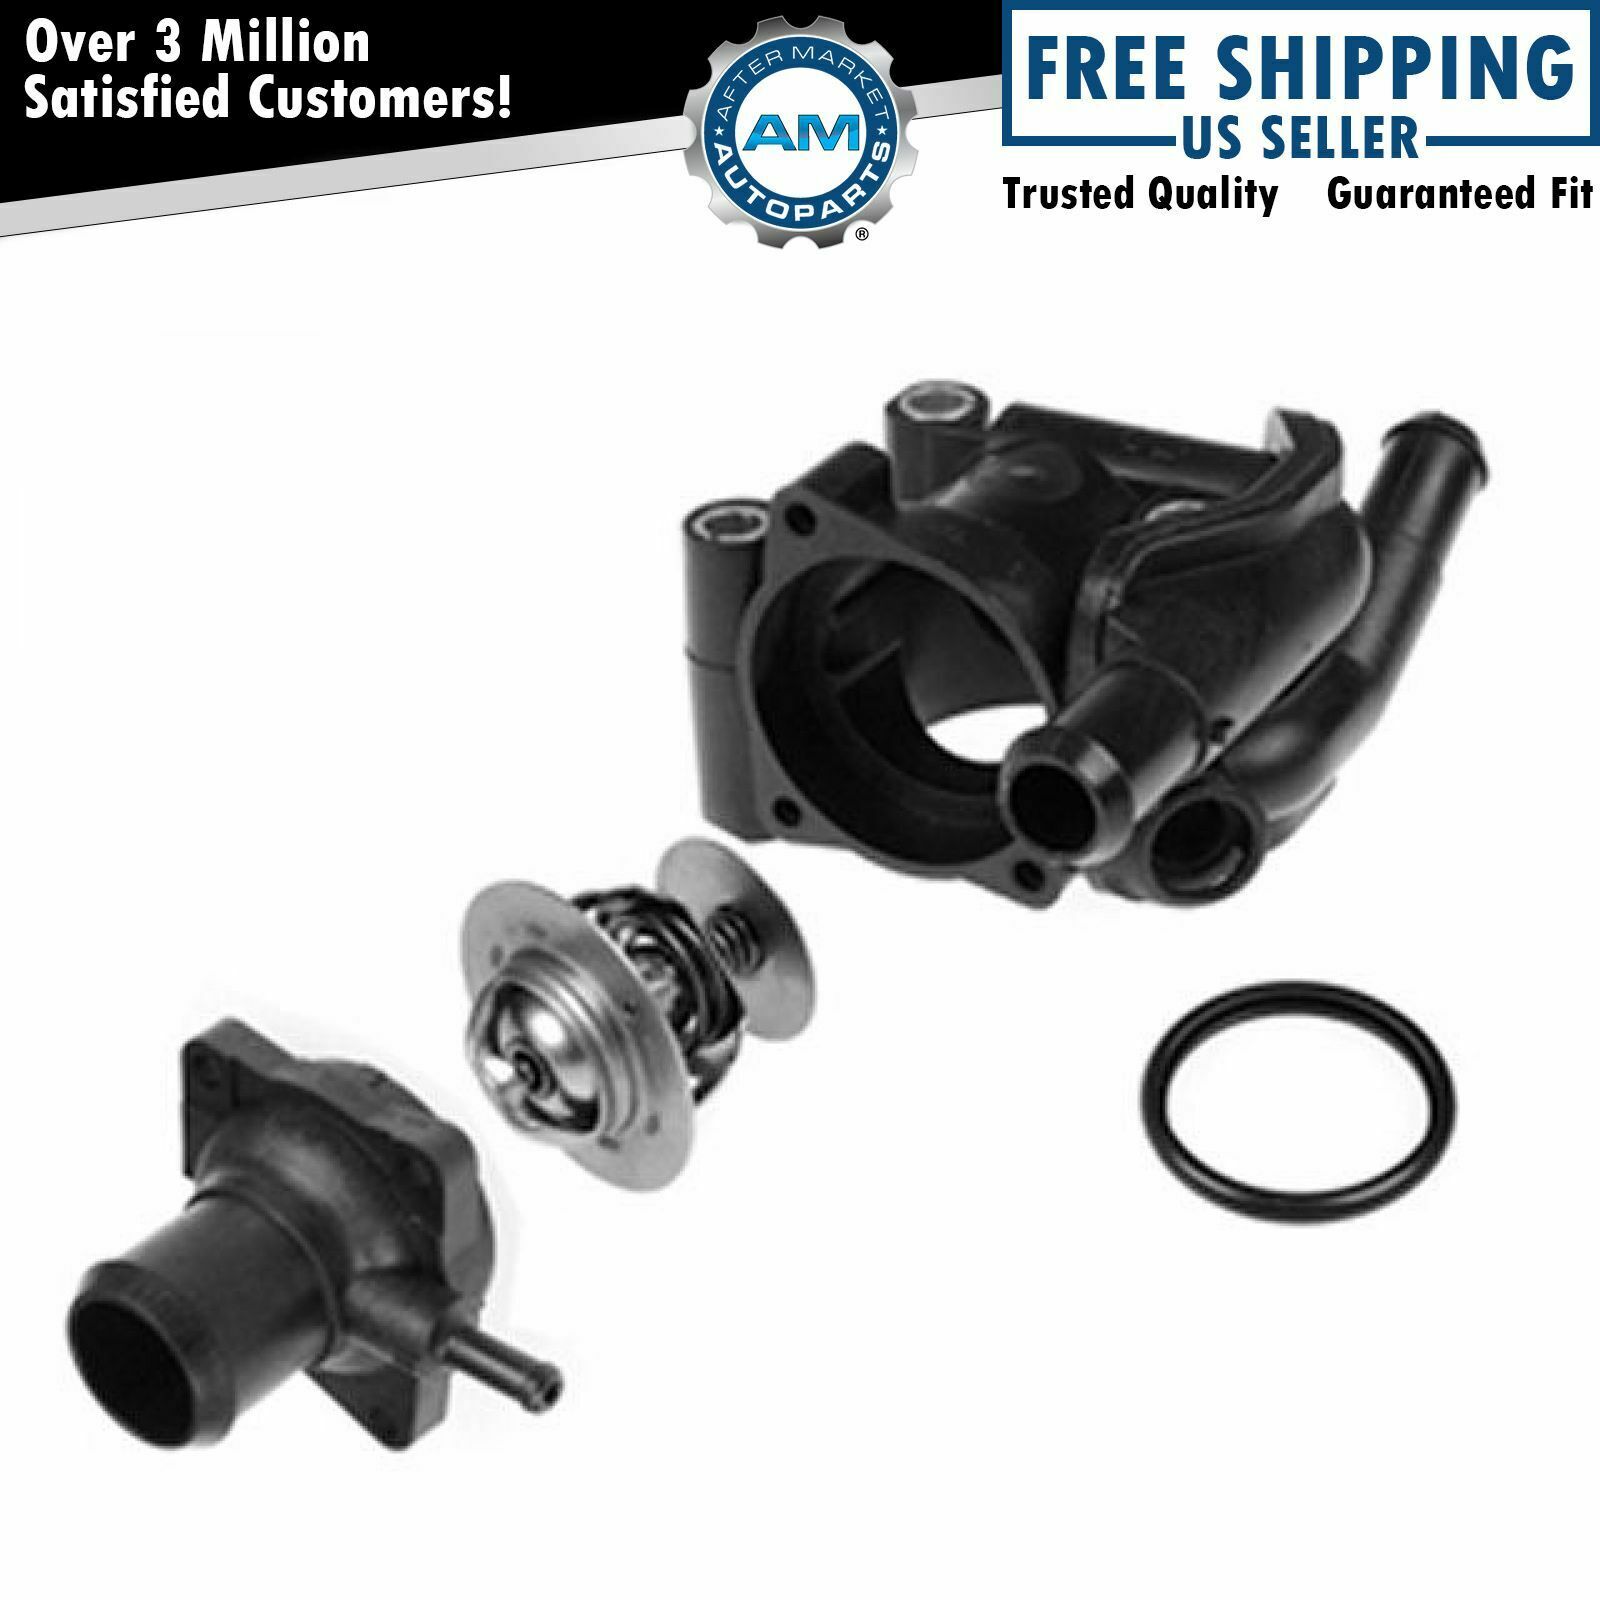 Water Outlet Housing & Thermostat Kit Set for Ford Focus Escape 2.0L